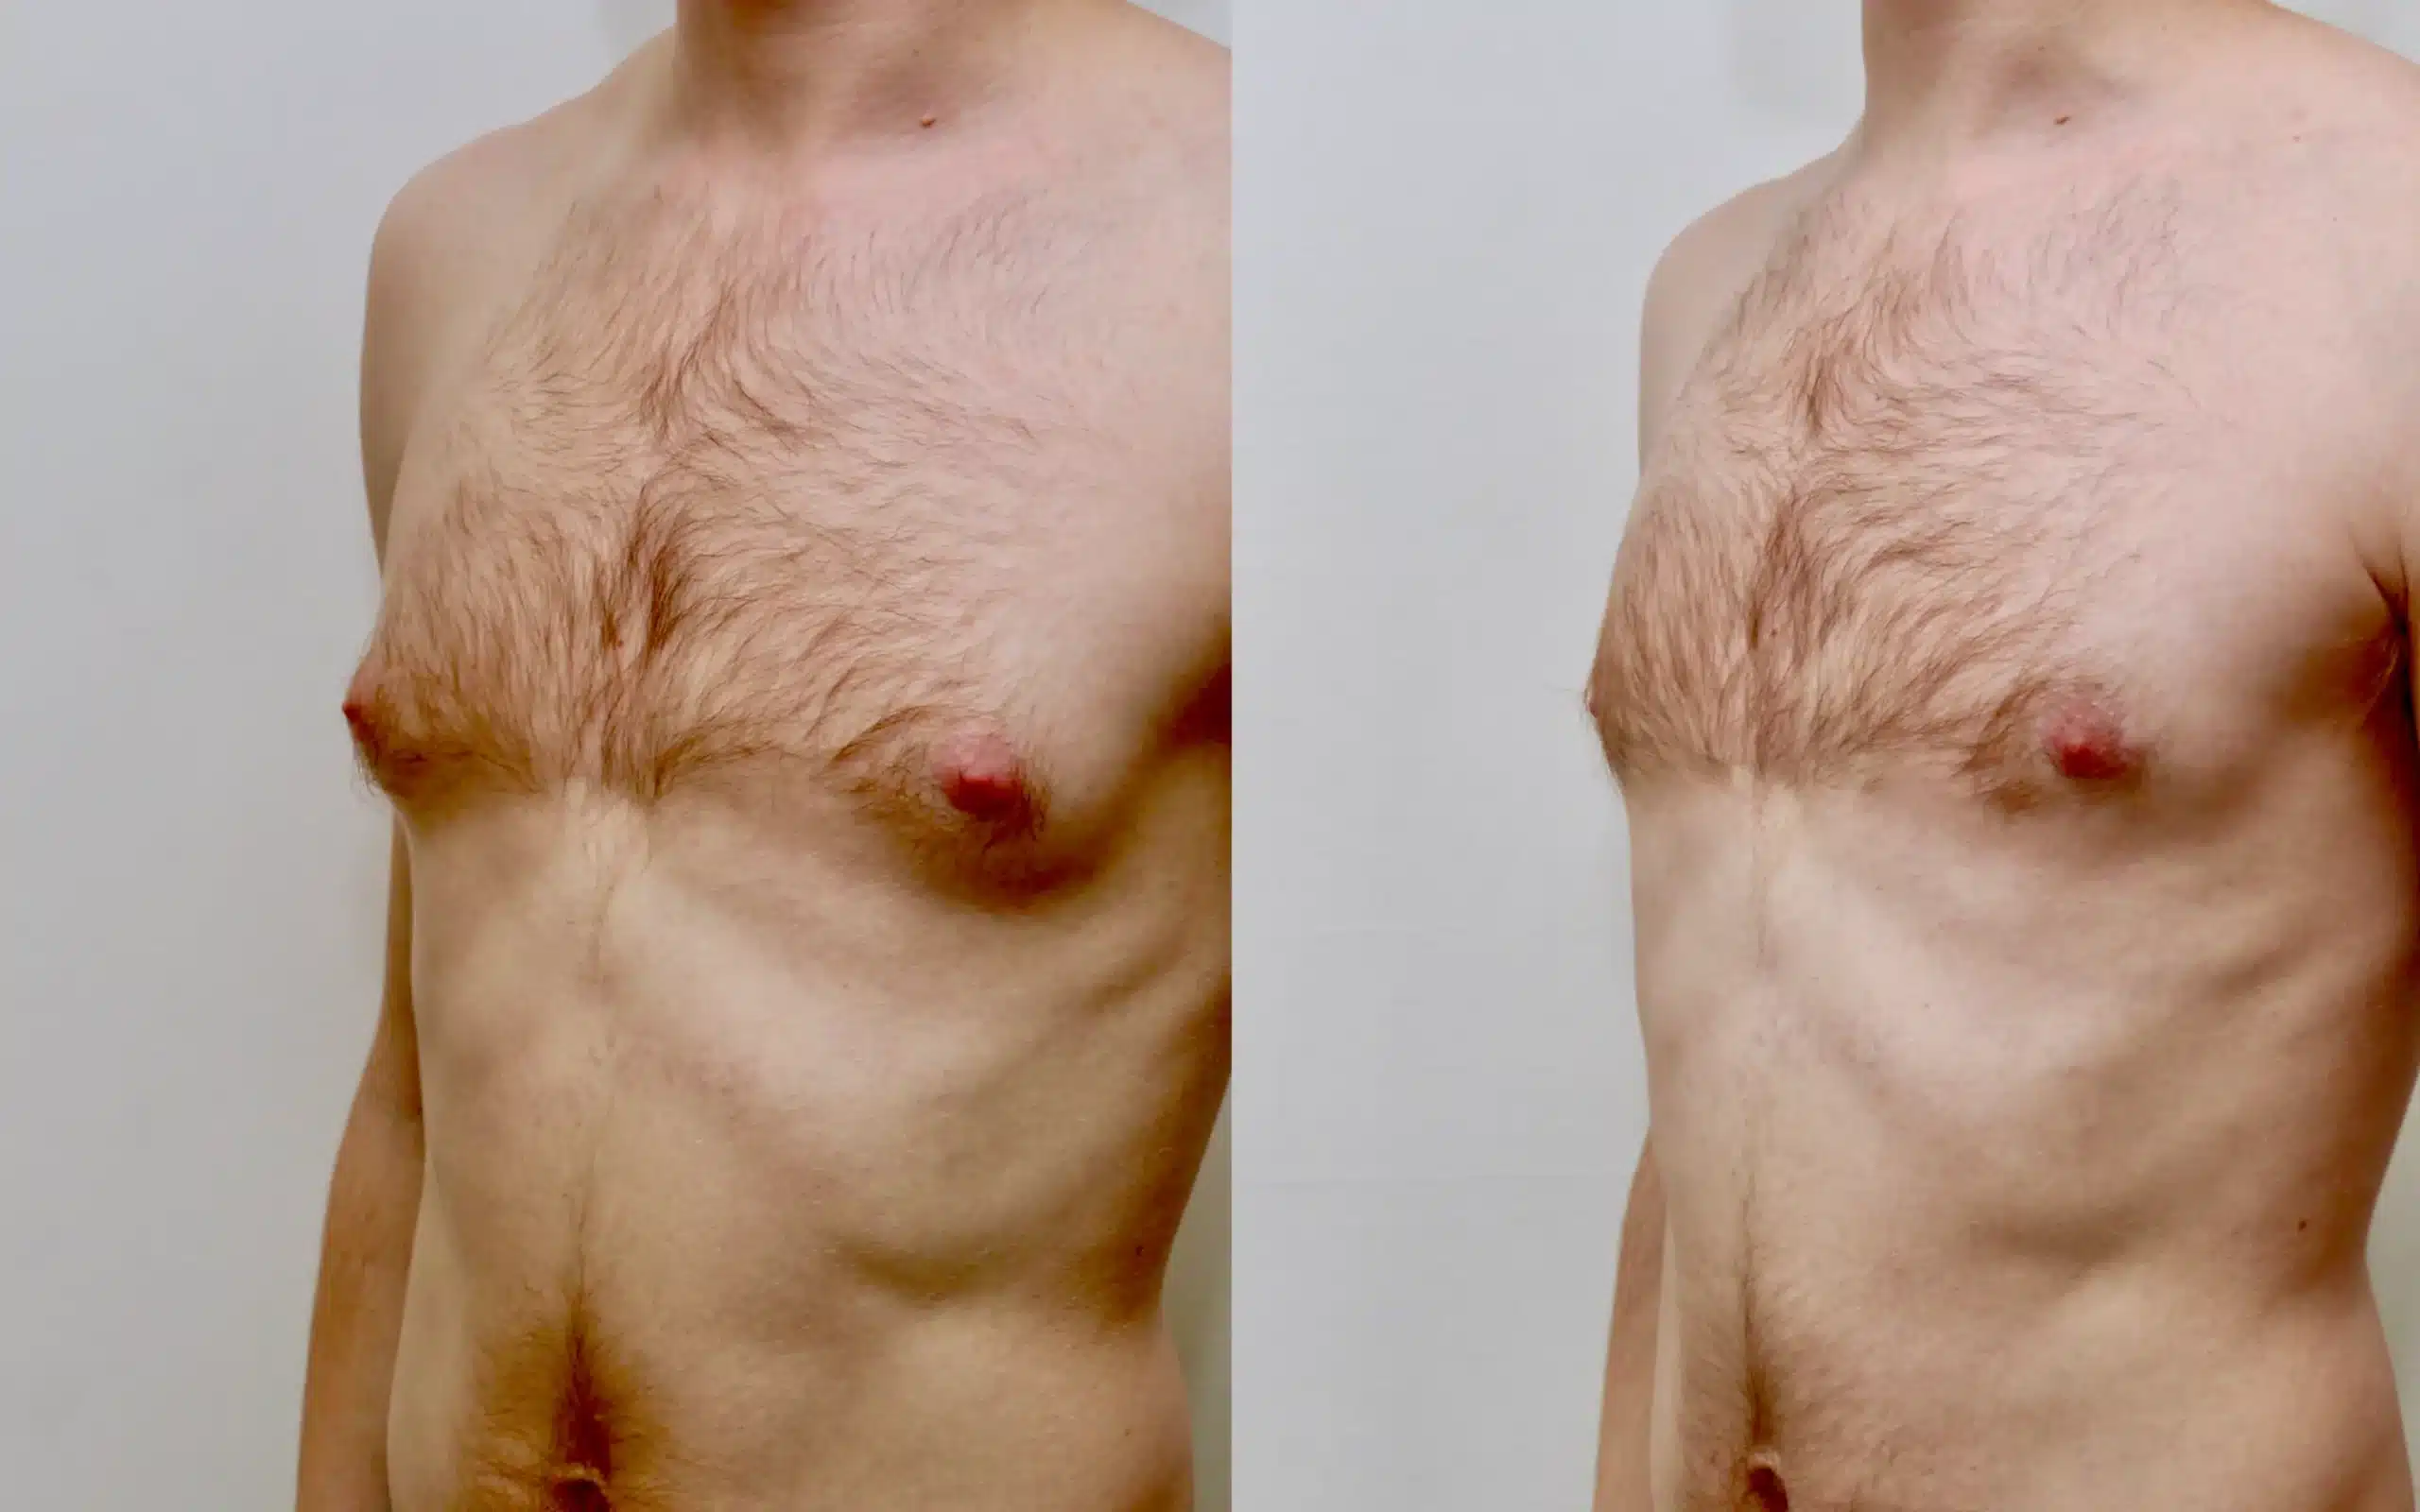 gyno surgery before and after under local anaesthesia